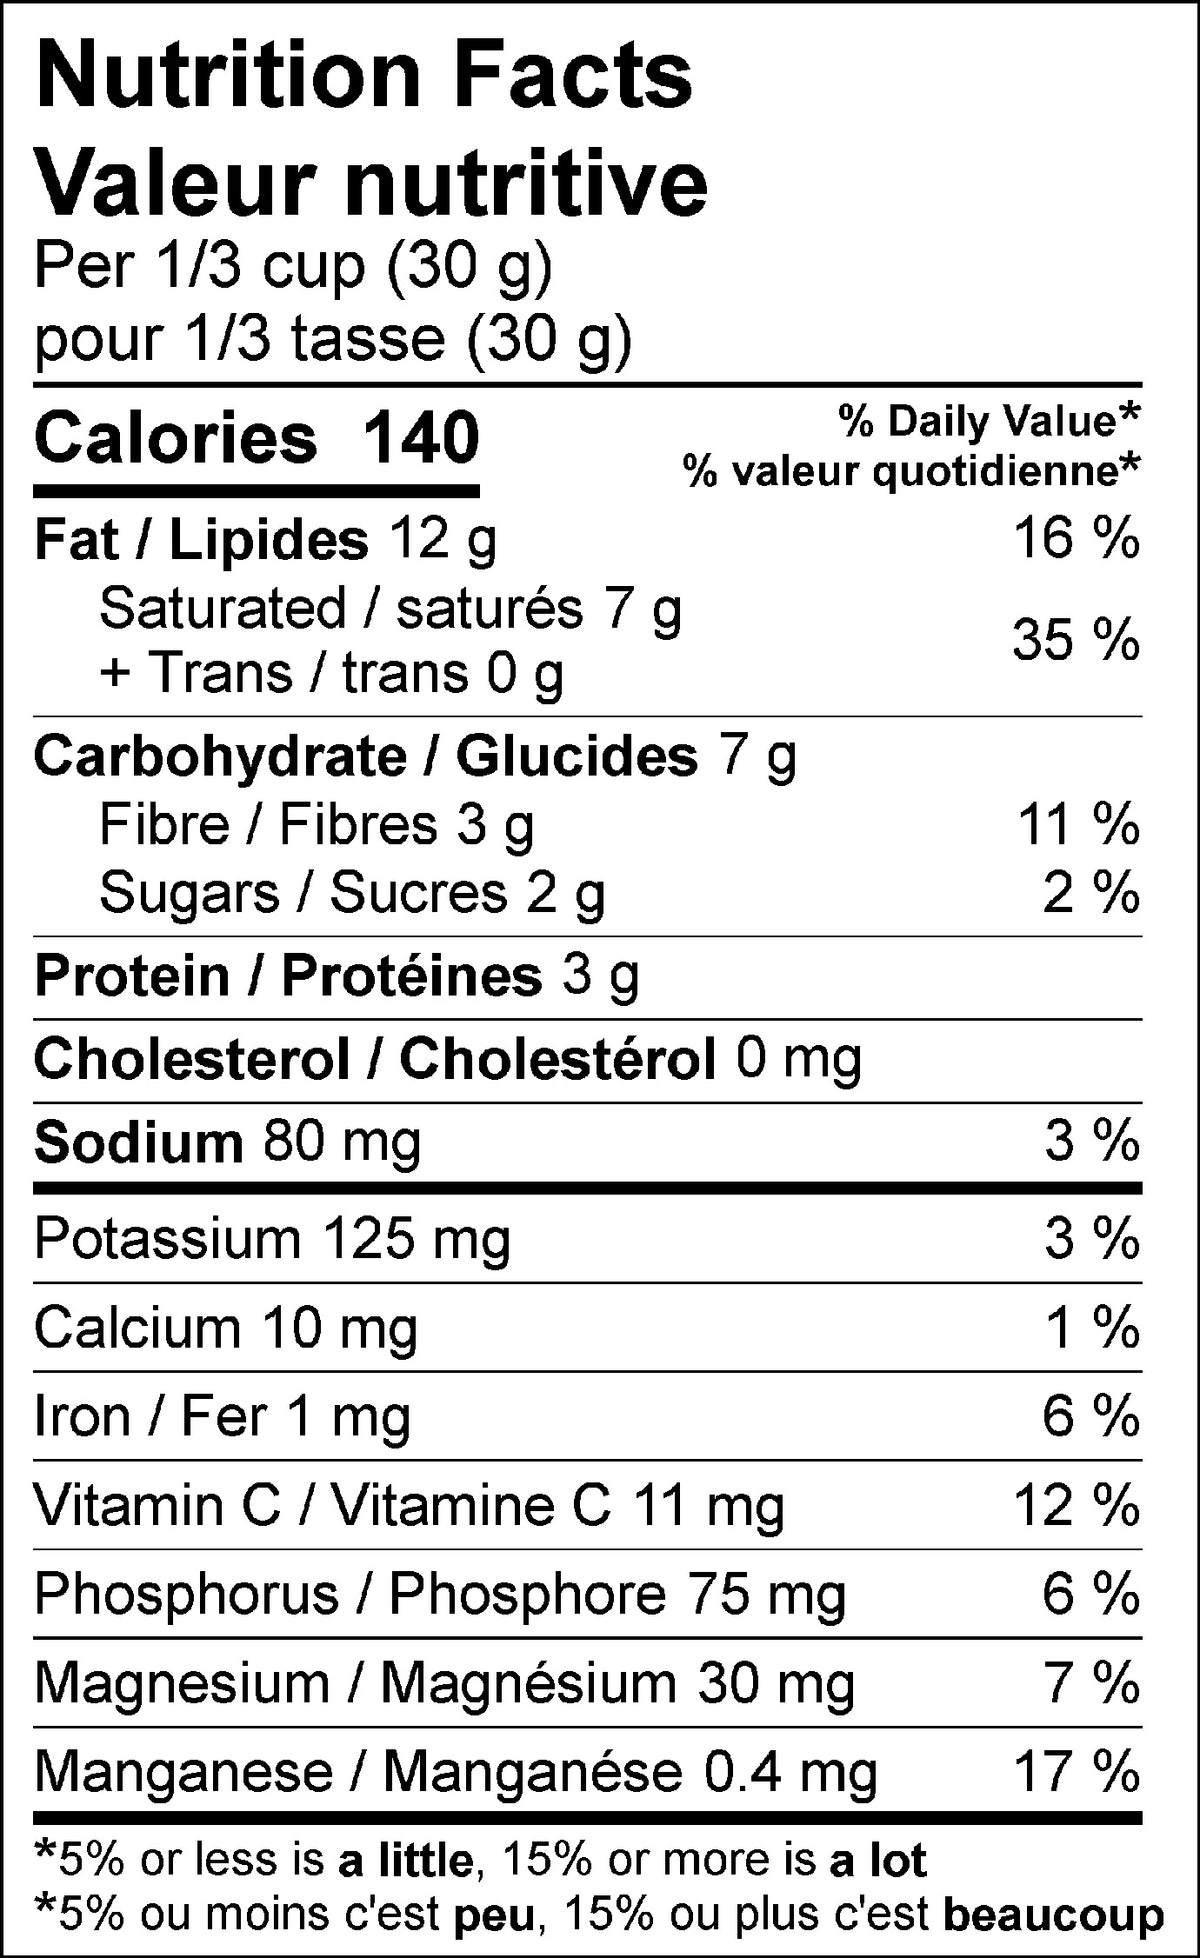 Rawcology Inc. Lemon Ginger with Camu Camu Raw Crunch Granola Nutrition Facts Table